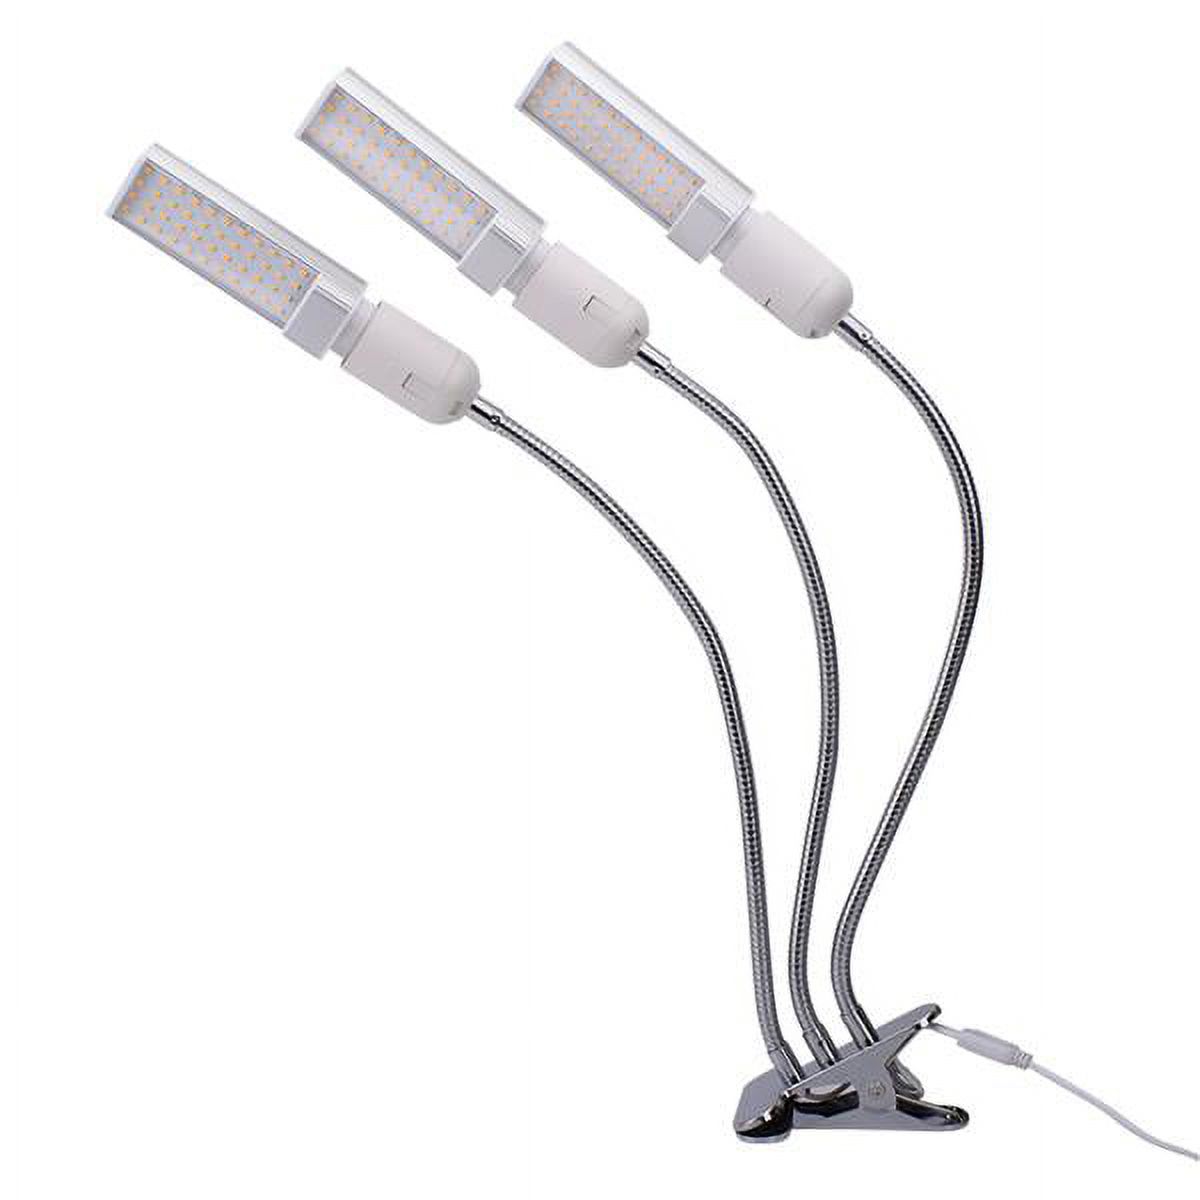 60W 5V Dimmable Three-head Flat Clip Corn Plant Light Full Spectrum Warm White 3000K 132LED Silver (Actual Power 20W) - image 1 of 15